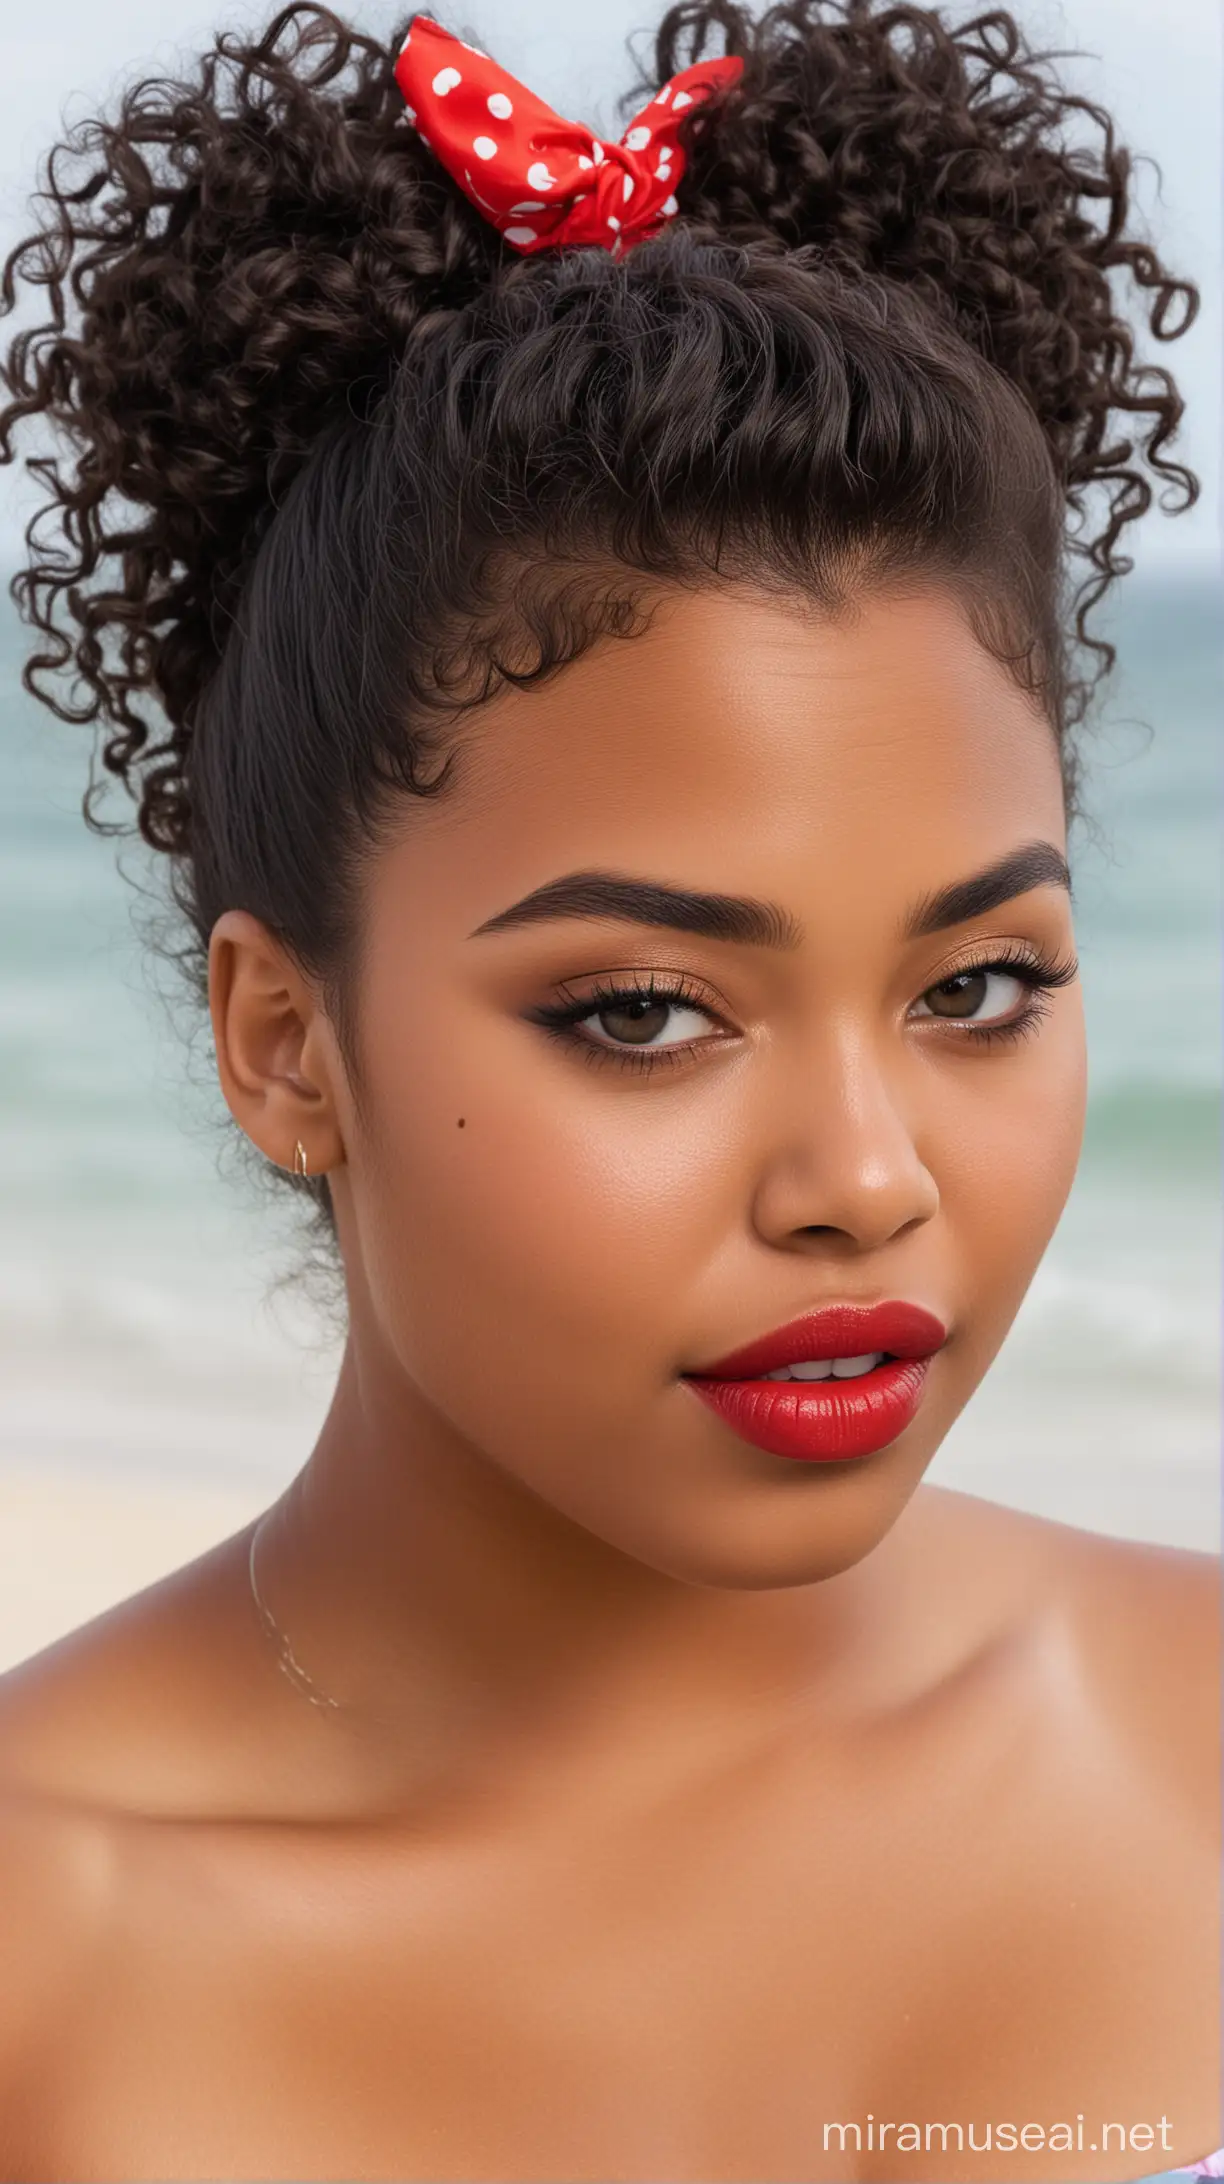 A 17 year old fat black woman with small eyes, wide red lips, weak chin, small nose and long curly black hair with a bun at back wearing a bikini at a beach 